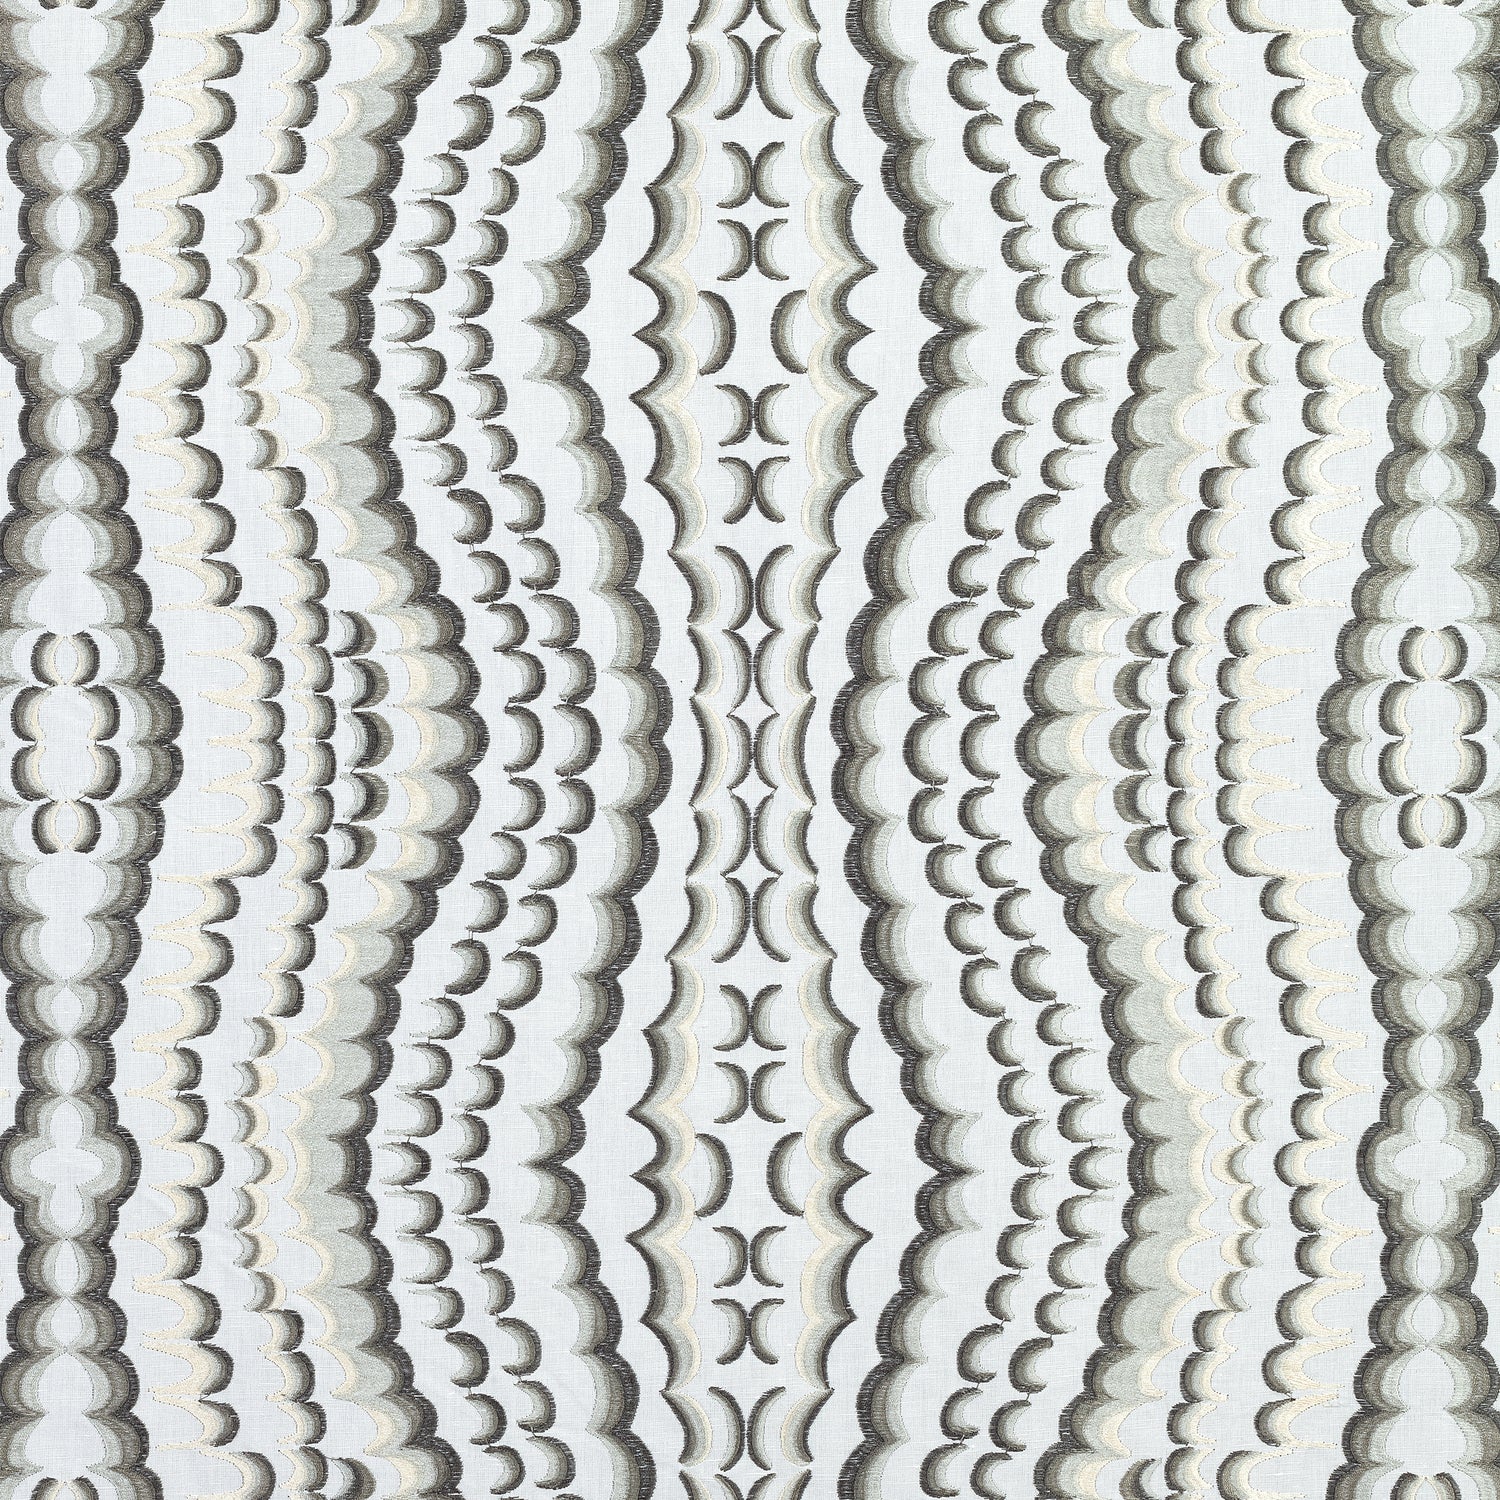 Ebru Embroidery fabric in grey color - pattern number W72981 - by Thibaut in the Paramount collection